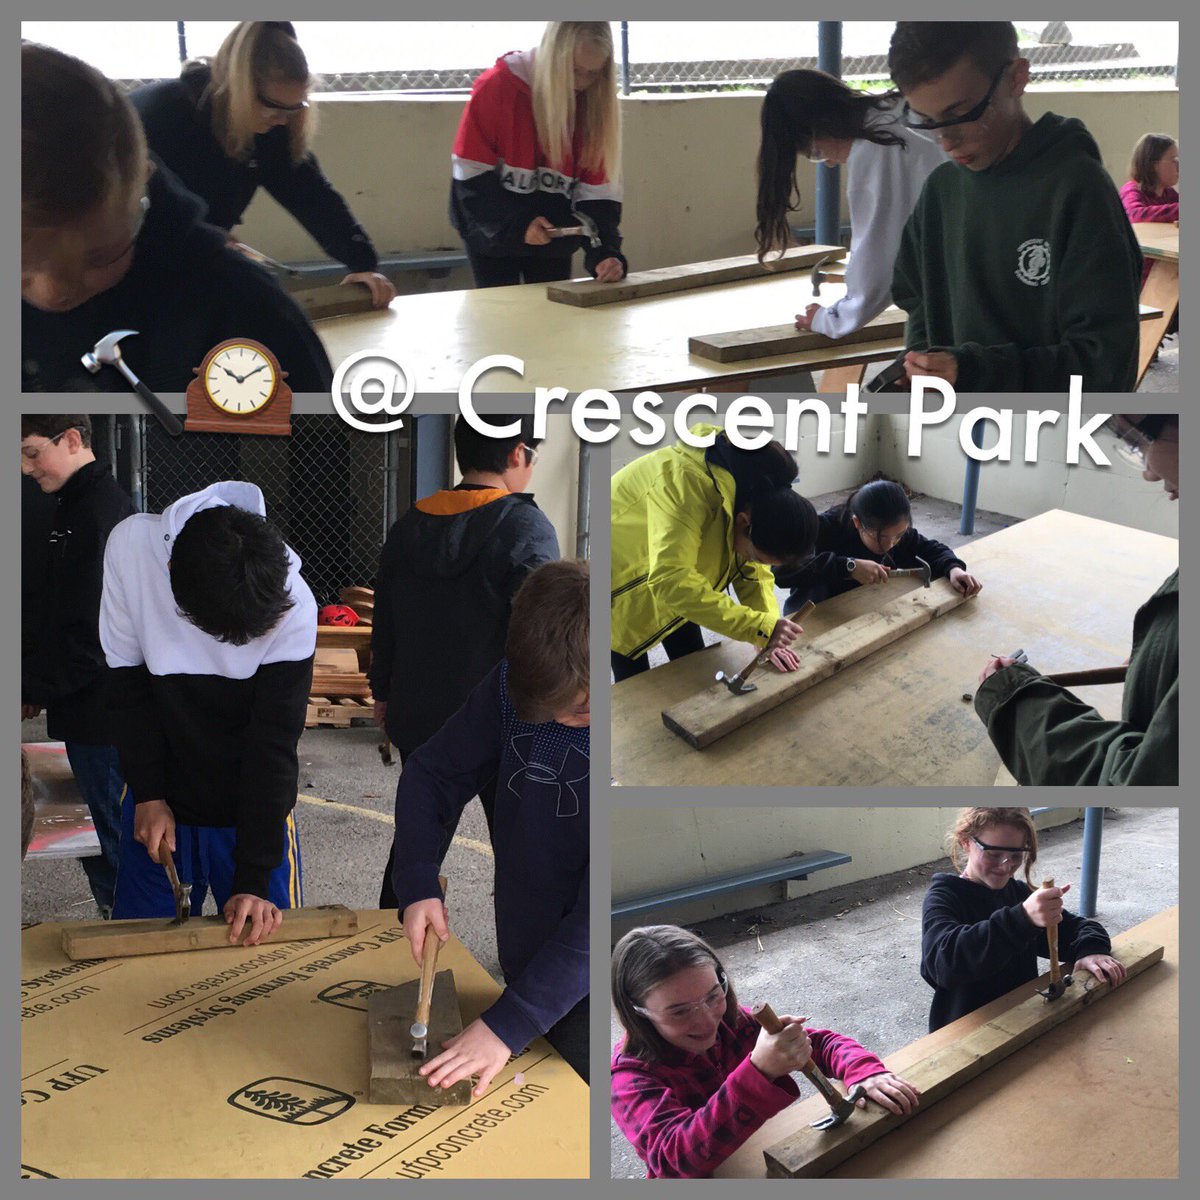 Before we 🔨a 🐦 🏠 U learn how 2 🔨! Some practice & game time! Hammerschlagen or Nagelspiele 🇩🇪 anyone? Who knew a 🌲stump, 🔨 & nails could bring such joy & excitement!🤗🤓 #sd36adst @crescentpark36 #sd36learn @ScottSmithSD36 @BankesADST @TechEdDarnel @KymBaileyCook1 @unruh_j